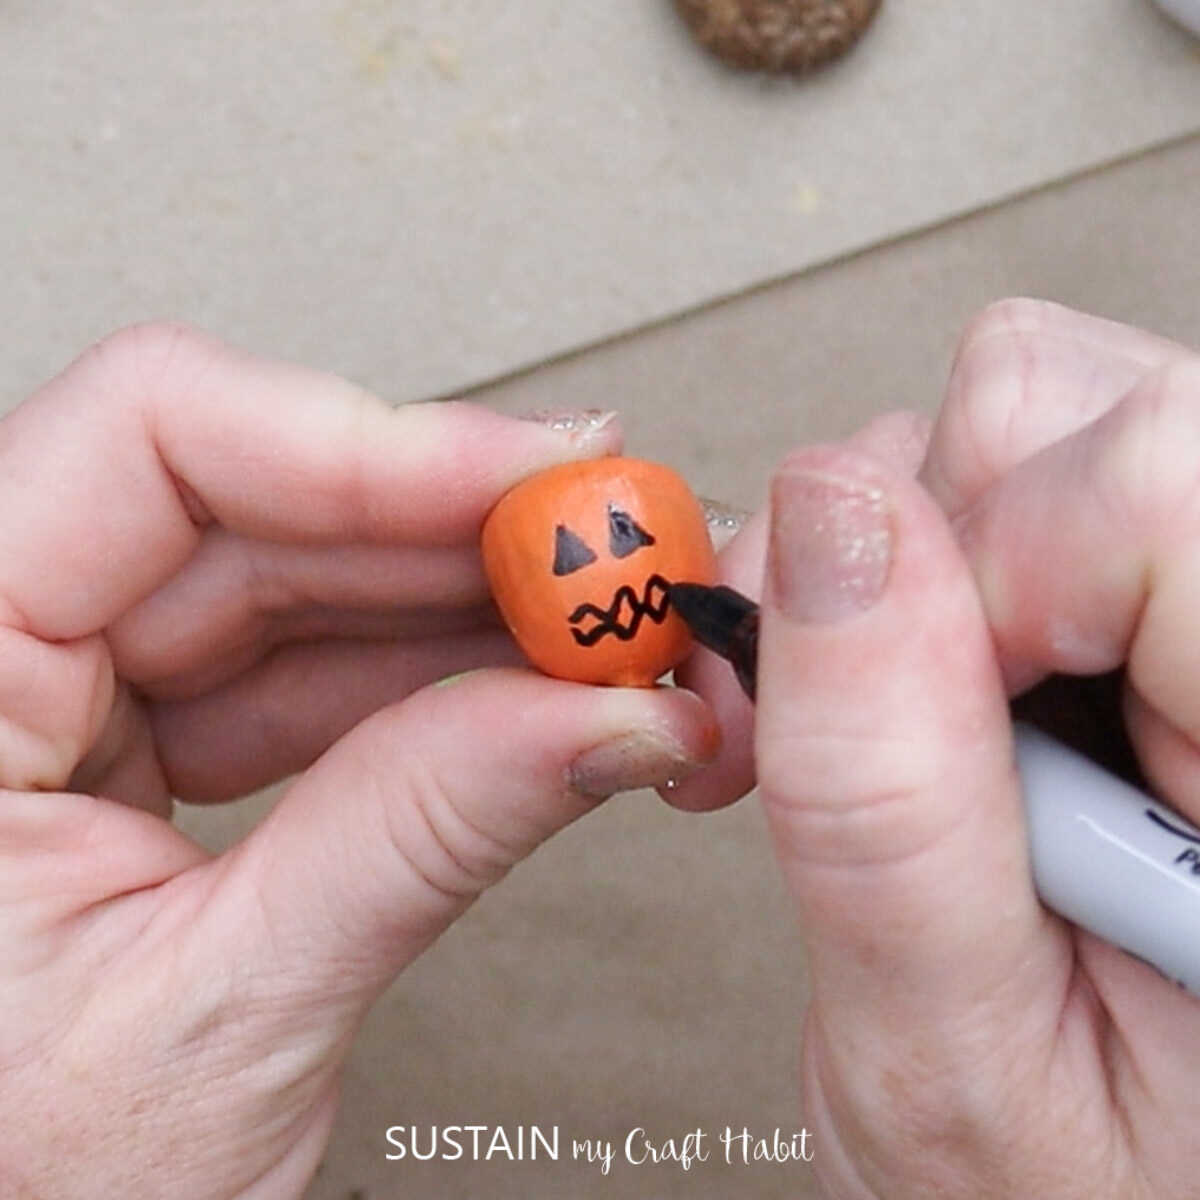 Adding a jack-o-lantern face to the painted acorn.